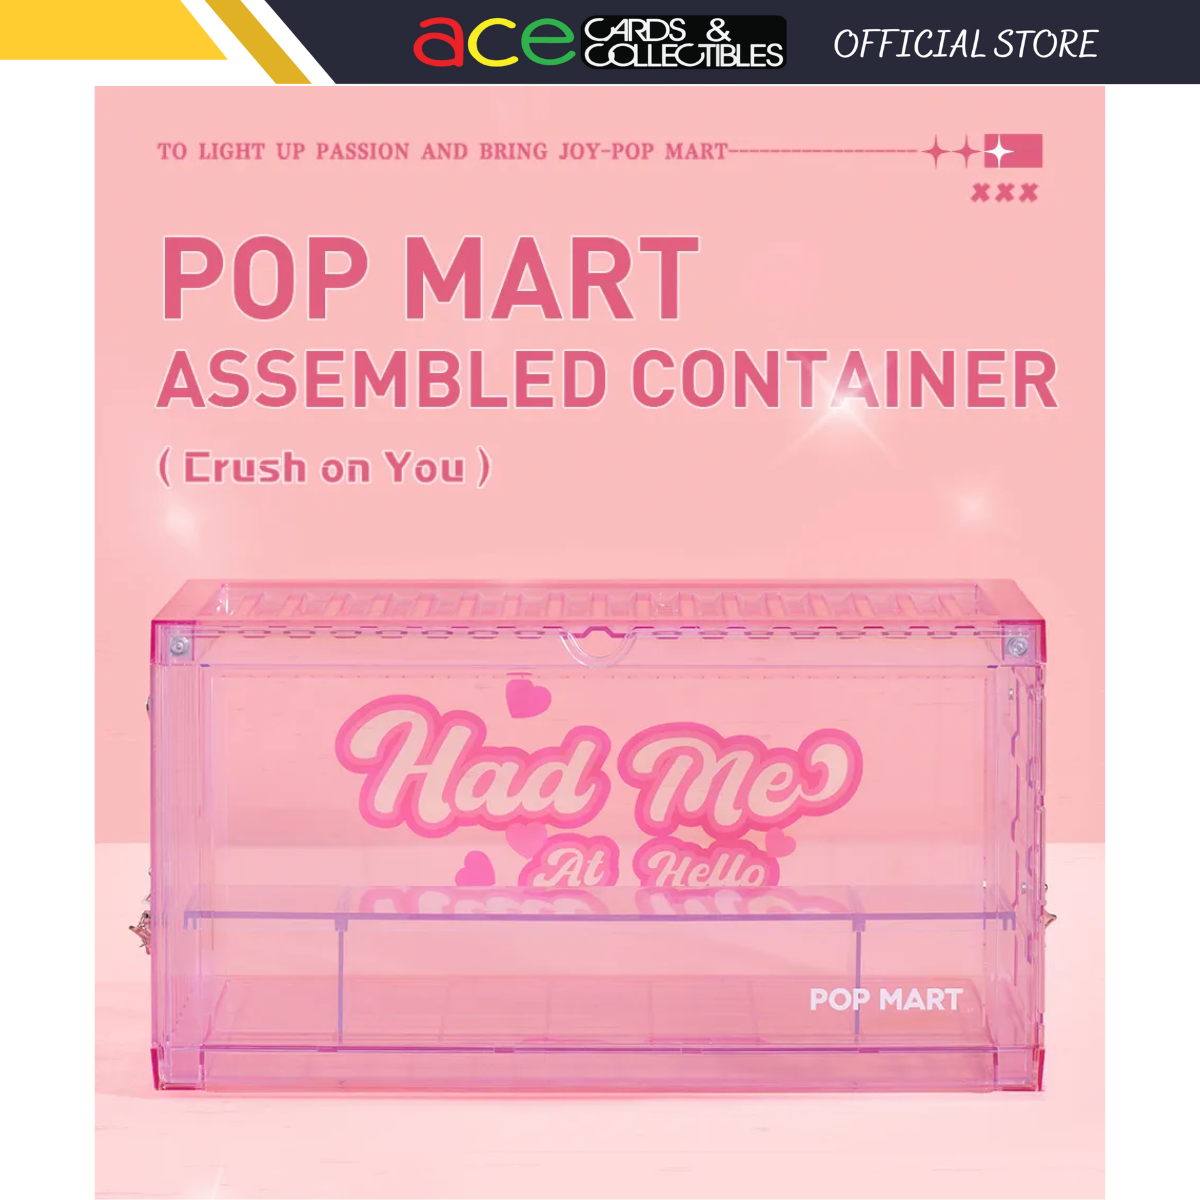 POP MART Assembled Display Container (Crush On You)-Pop Mart-Ace Cards & Collectibles